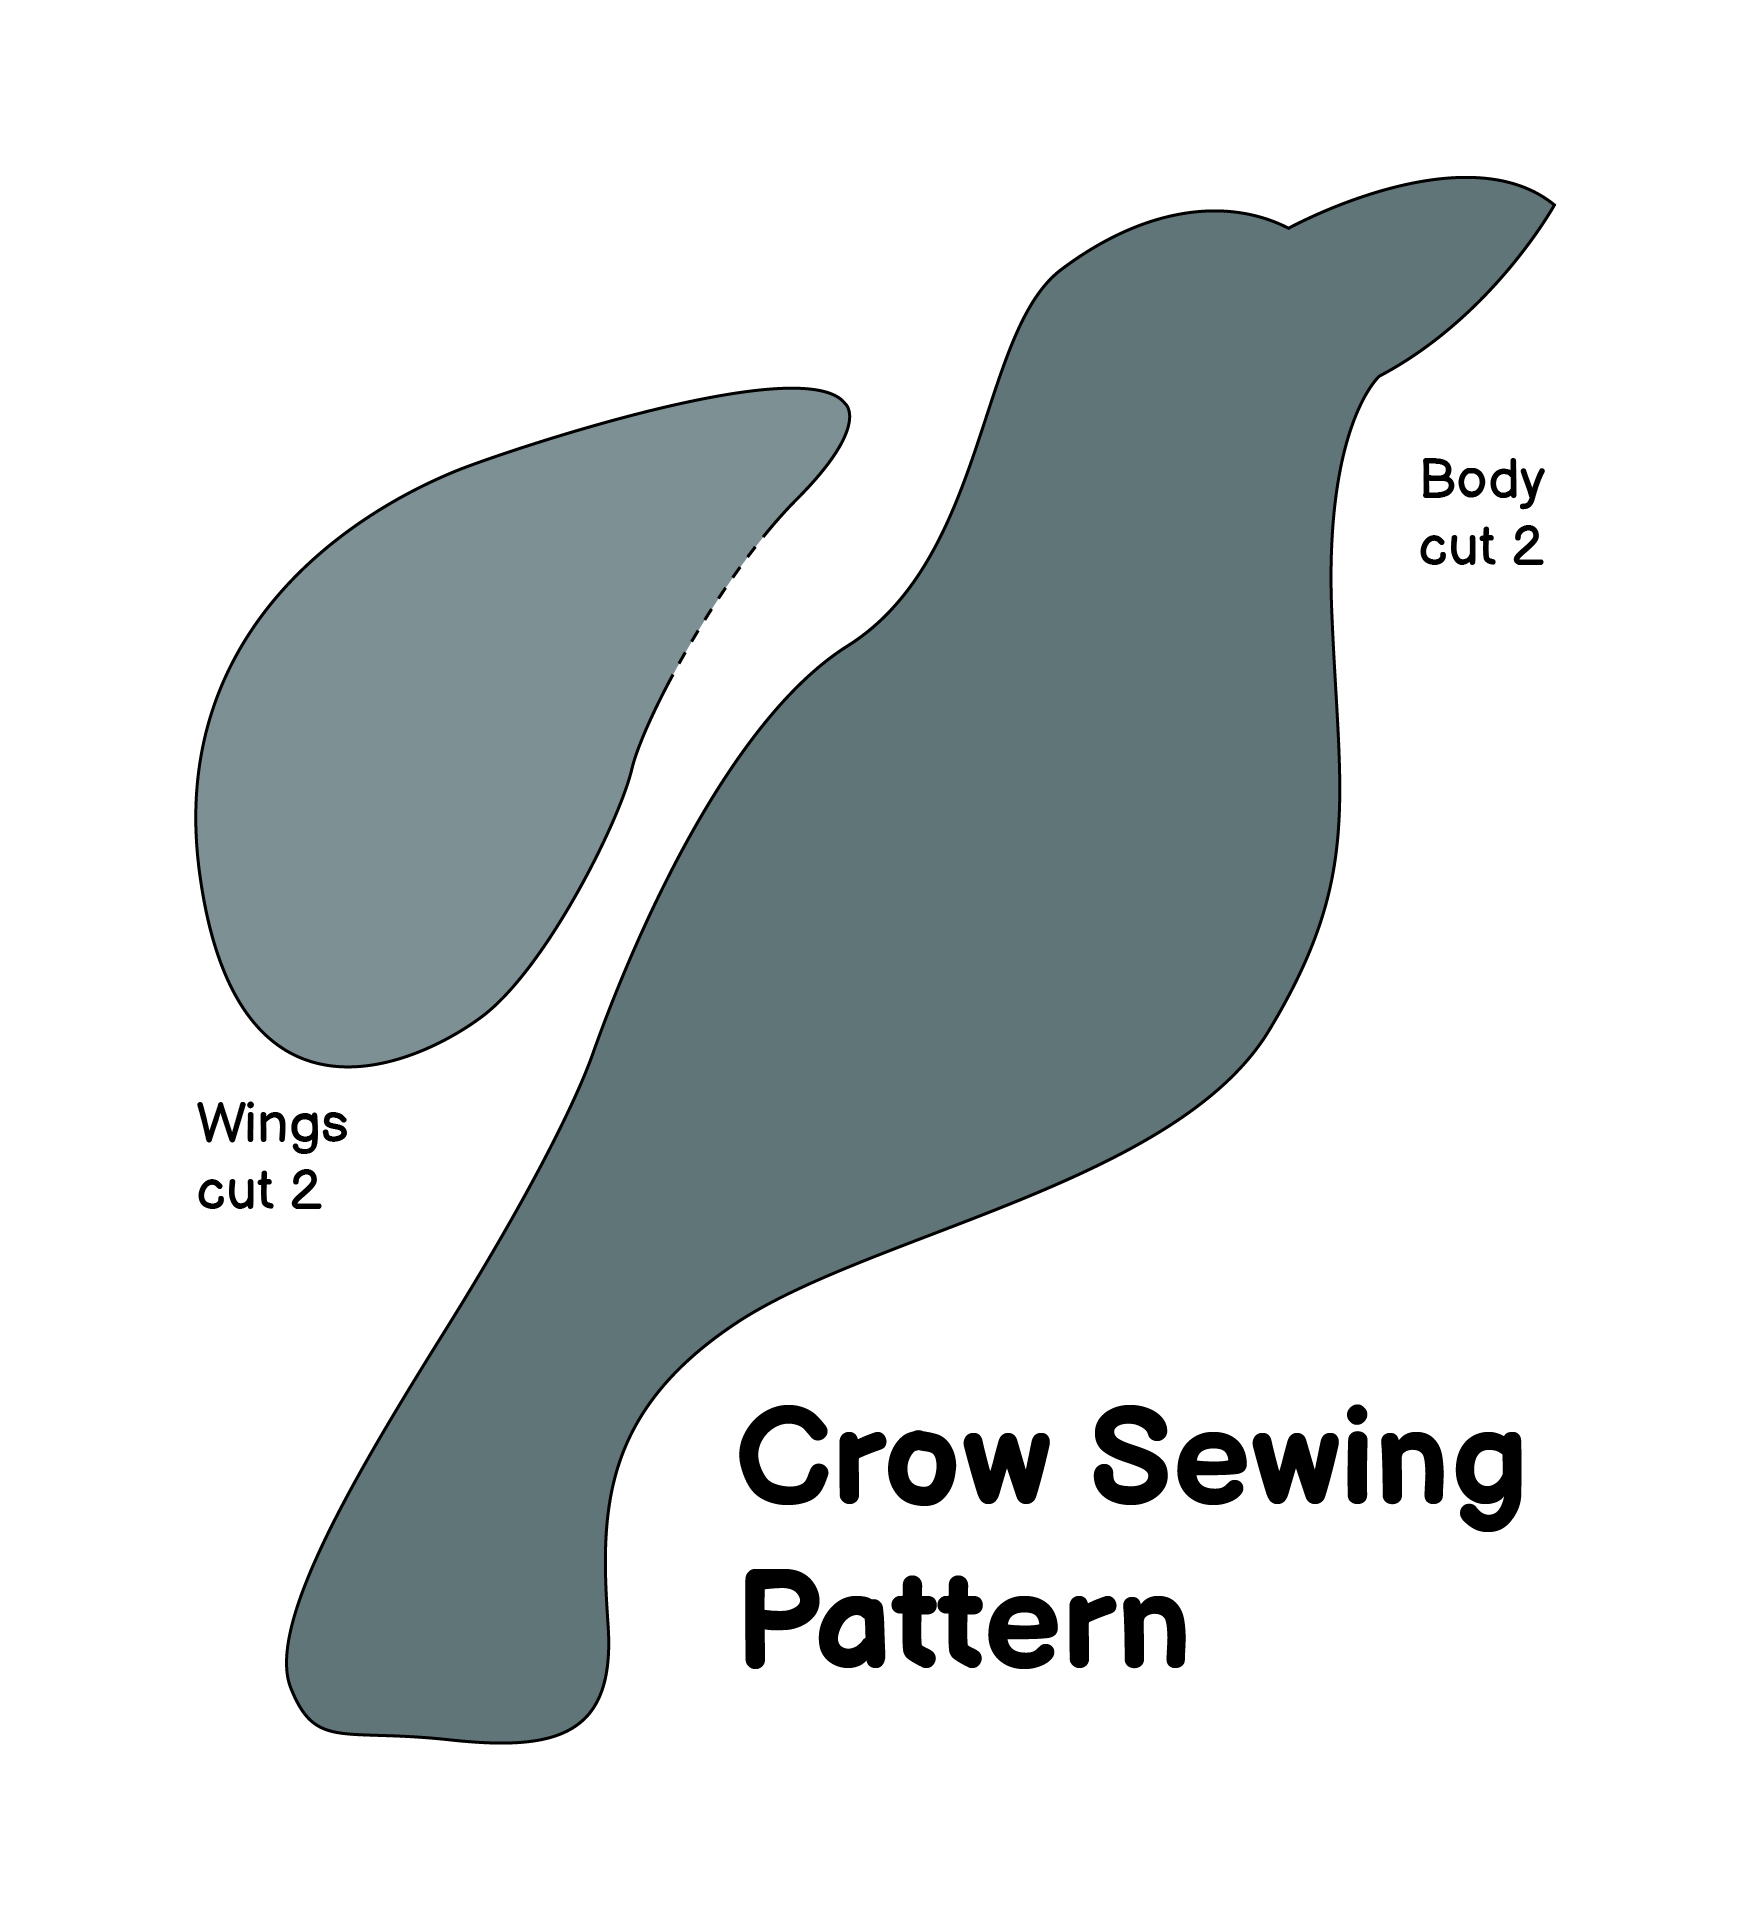 Crow Sewing Pattern